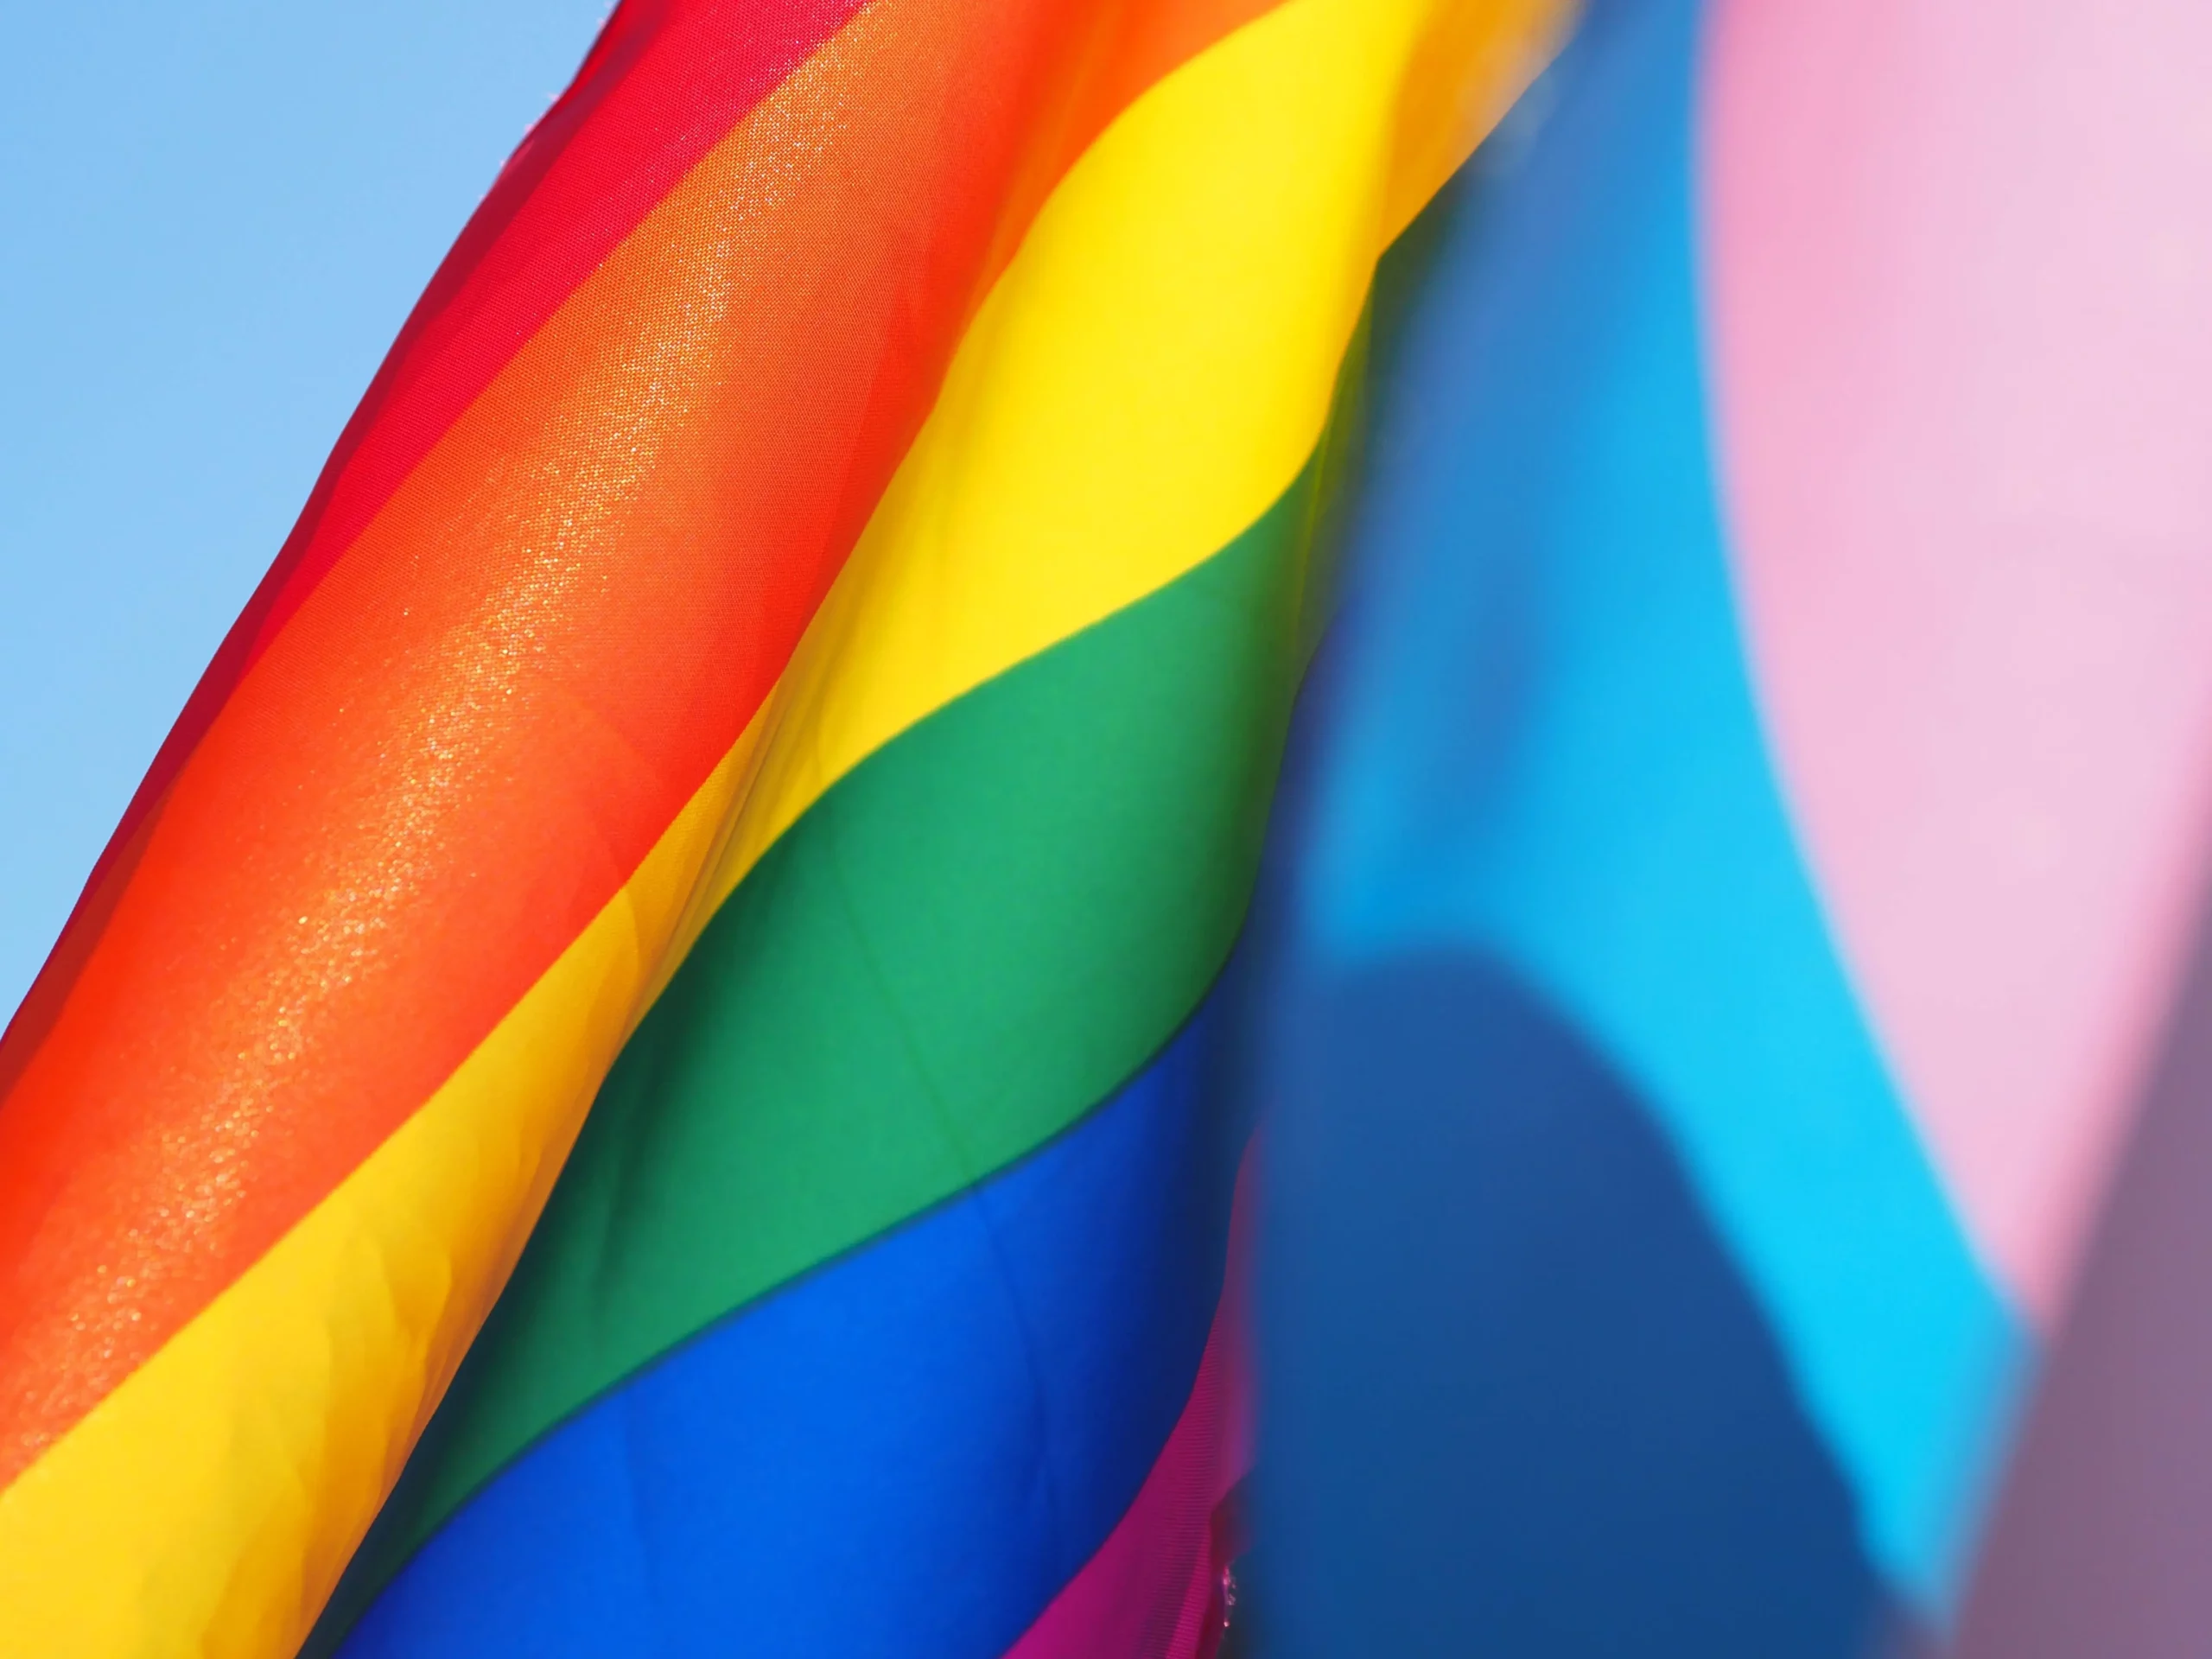 5 WAYS TO AUTHENTICALLY MARKET TO LGBTQ+ CONSUMERS